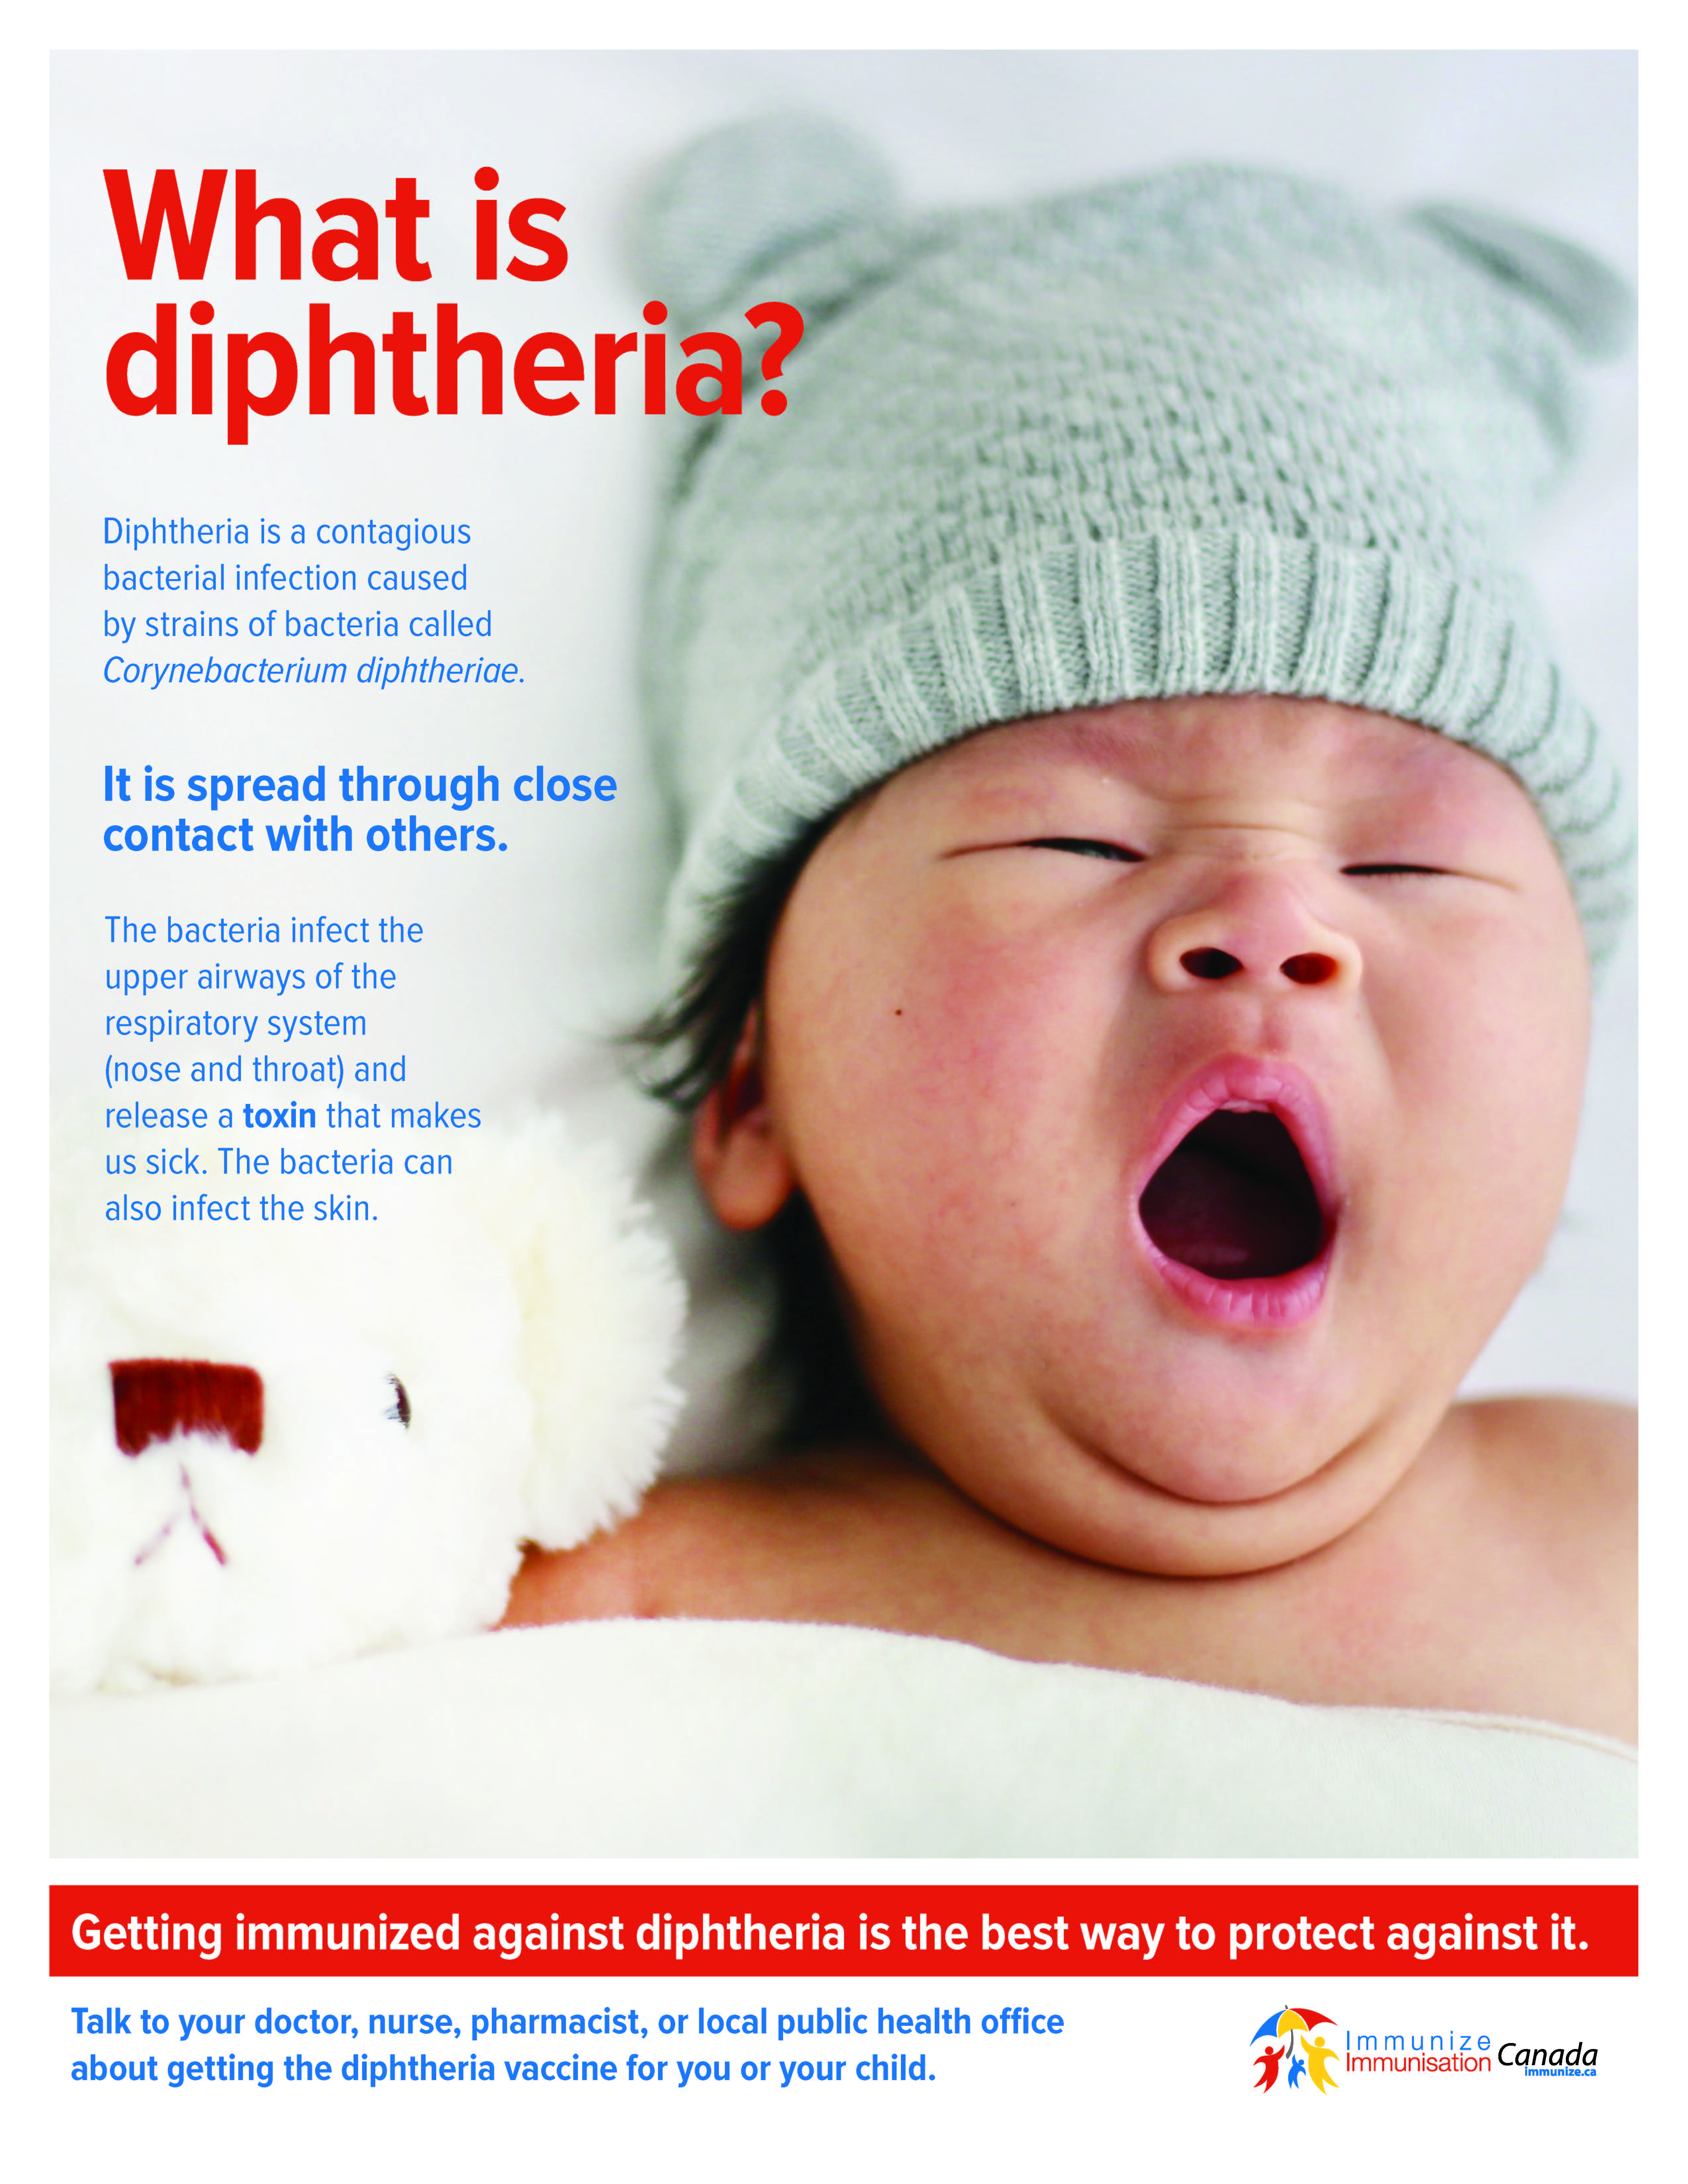 What is diphtheria?